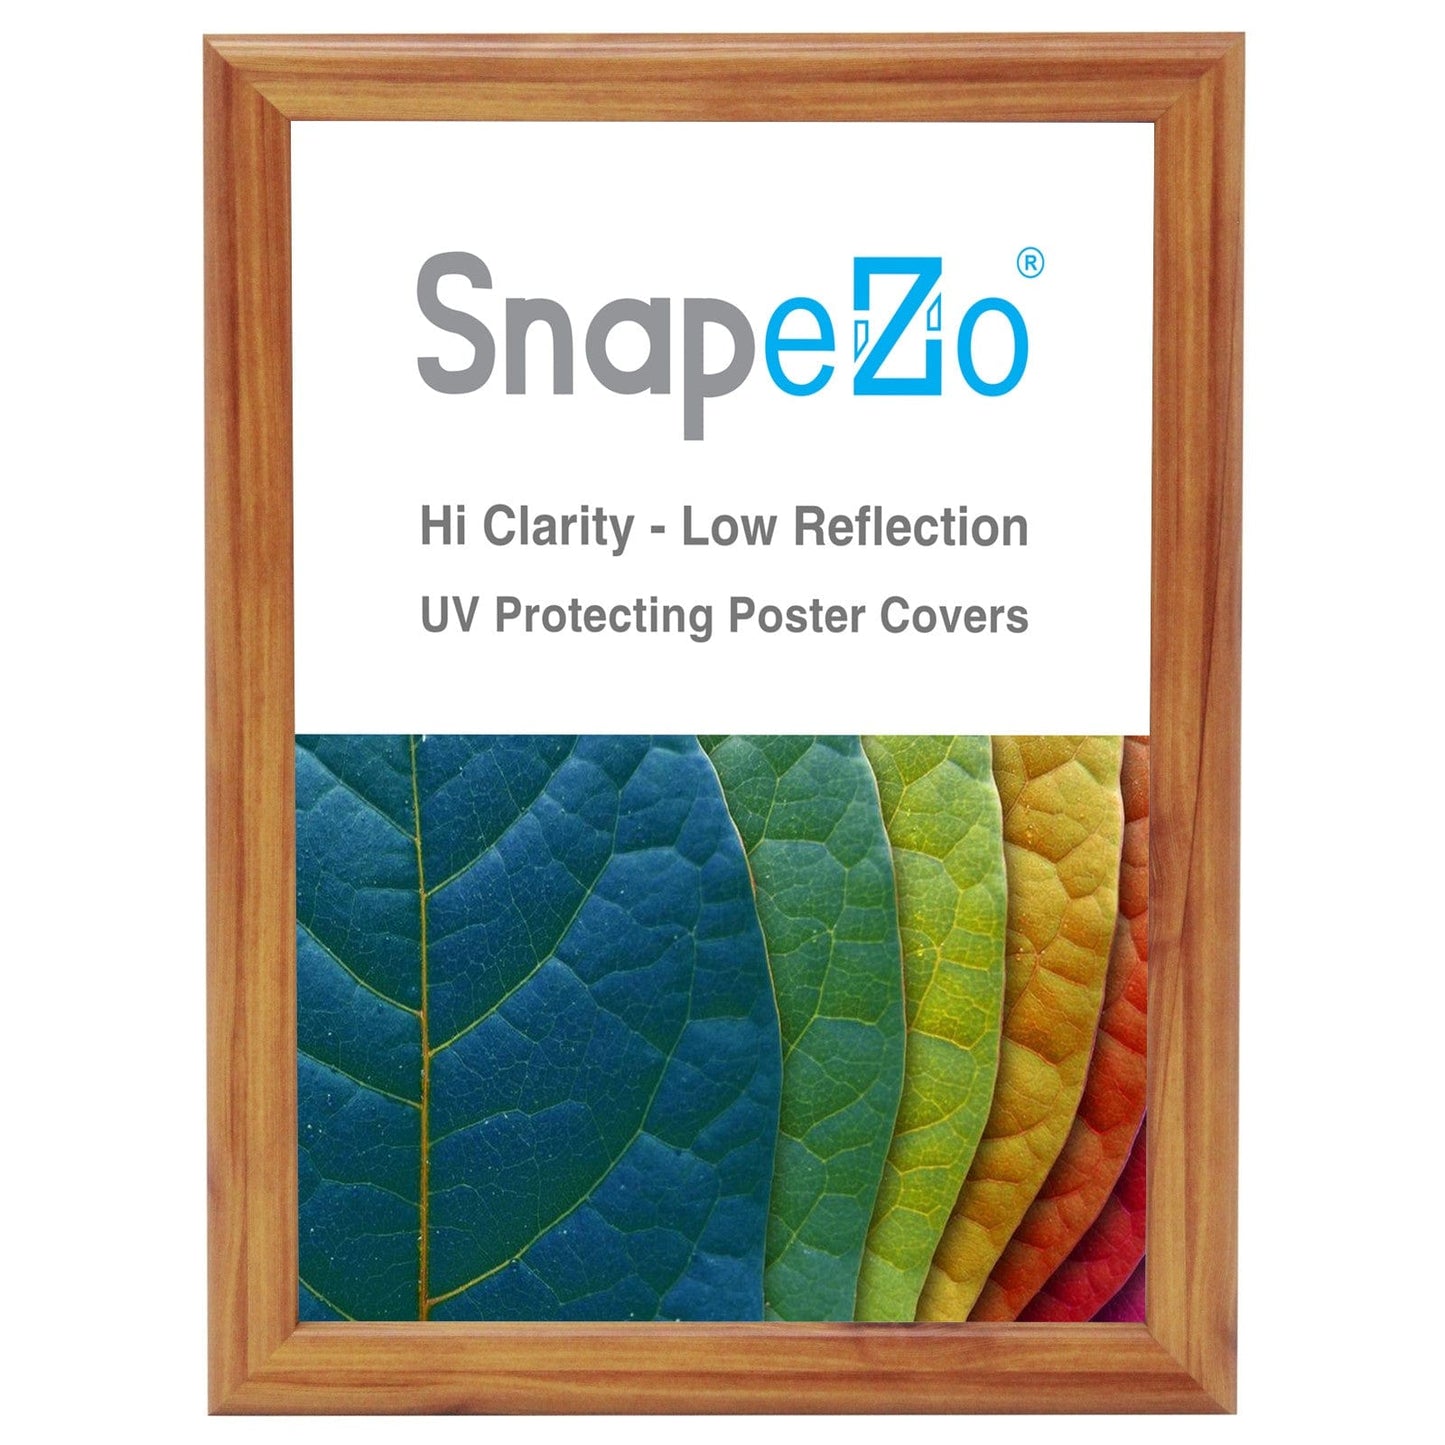 36x48 Wood Effect Poster Frame 1.25 Inch SnapeZo® - Snap Frames Direct